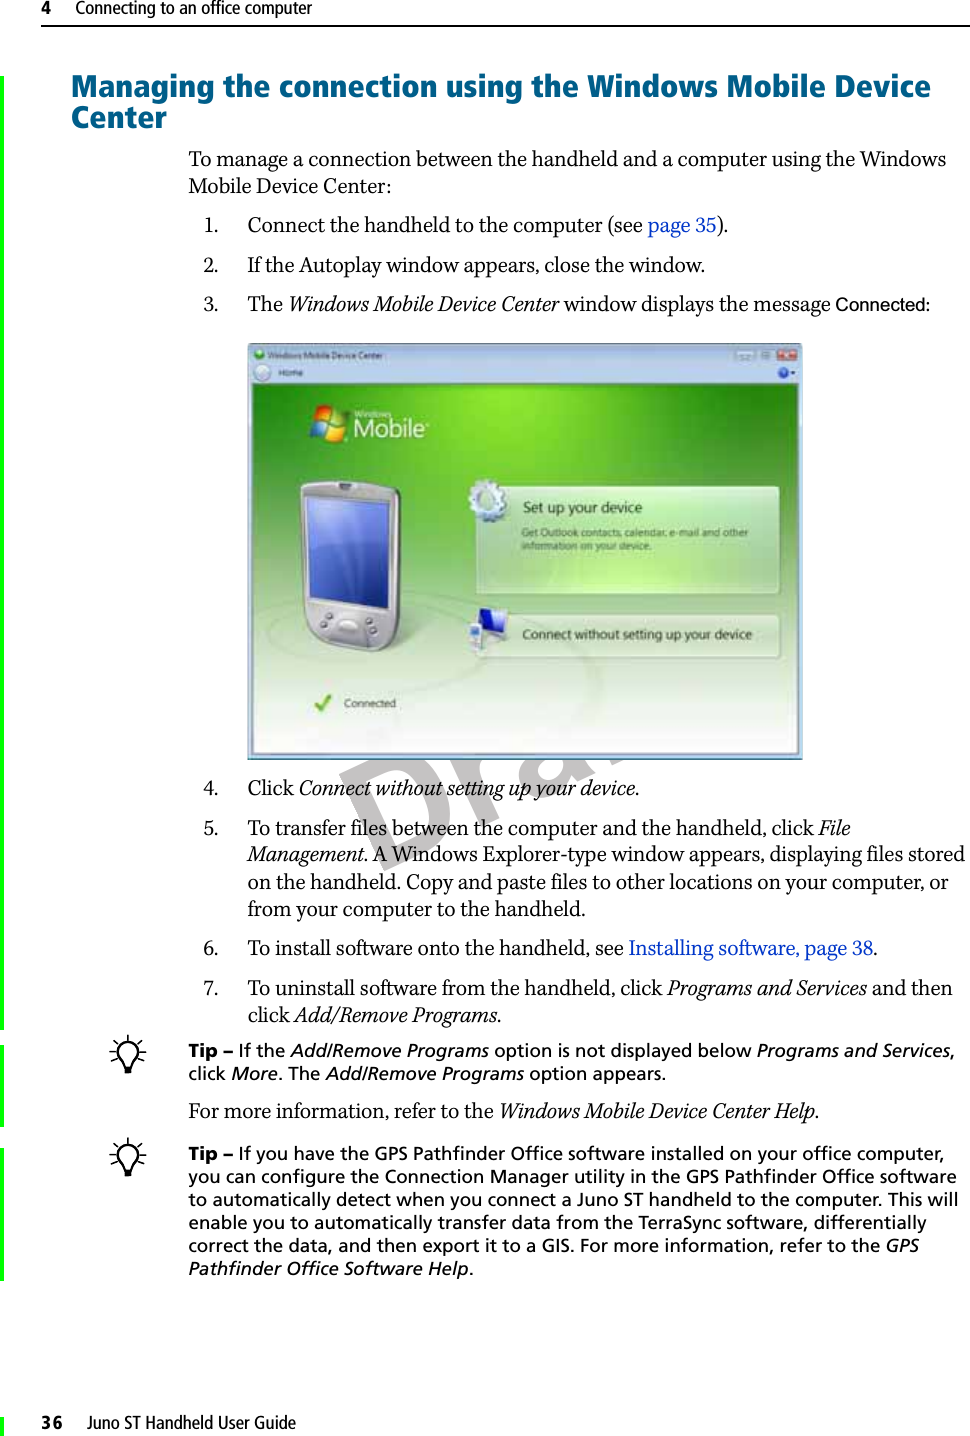 Draft4     Connecting to an office computer36     Juno ST Handheld User GuideManaging the connection using the Windows Mobile Device CenterTo manage a connection between the handheld and a computer using the Windows Mobile Device Center:1. Connect the handheld to the computer (see page 35). 2. If the Autoplay window appears, close the window.  3. The Windows Mobile Device Center window displays the message Connected:  4. Click Connect without setting up your device.5. To transfer files between the computer and the handheld, click File Management. A Windows Explorer-type window appears, displaying files stored on the handheld. Copy and paste files to other locations on your computer, or from your computer to the handheld.6. To install software onto the handheld, see Installing software, page 38.7. To uninstall software from the handheld, click Programs and Services and then click Add/Remove Programs.BTip – If the Add/Remove Programs option is not displayed below Programs and Services, click More. The Add/Remove Programs option appears.For more information, refer to the Windows Mobile Device Center Help. BTip – If you have the GPS Pathfinder Office software installed on your office computer, you can configure the Connection Manager utility in the GPS Pathfinder Office software to automatically detect when you connect a Juno ST handheld to the computer. This will enable you to automatically transfer data from the TerraSync software, differentially correct the data, and then export it to a GIS. For more information, refer to the GPS Pathfinder Office Software Help.